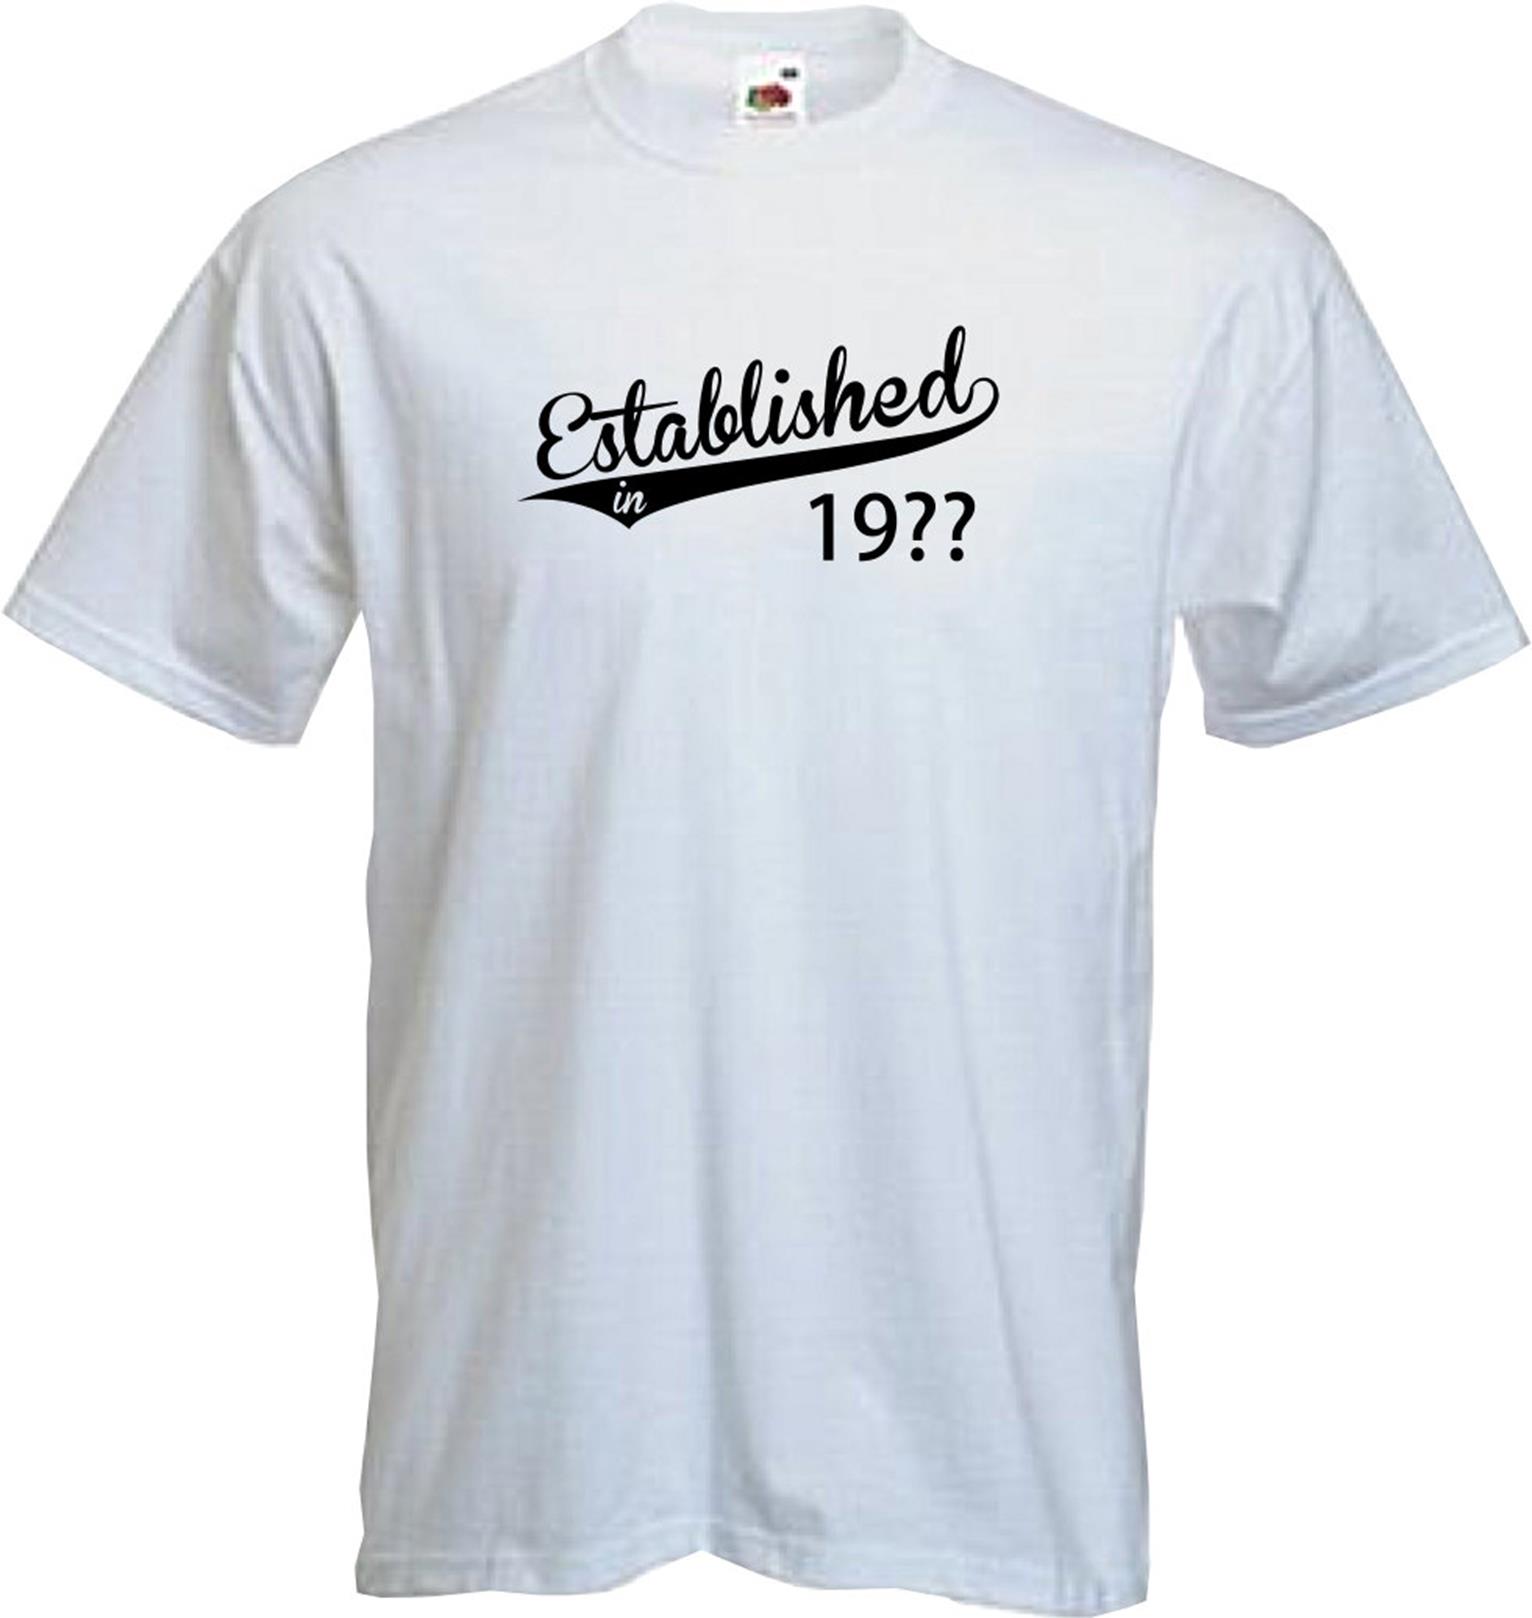 ESTABLISHED IN {ANY YEAR} - T Shirt, ANY BIRTHDAY, Present, Gift ...